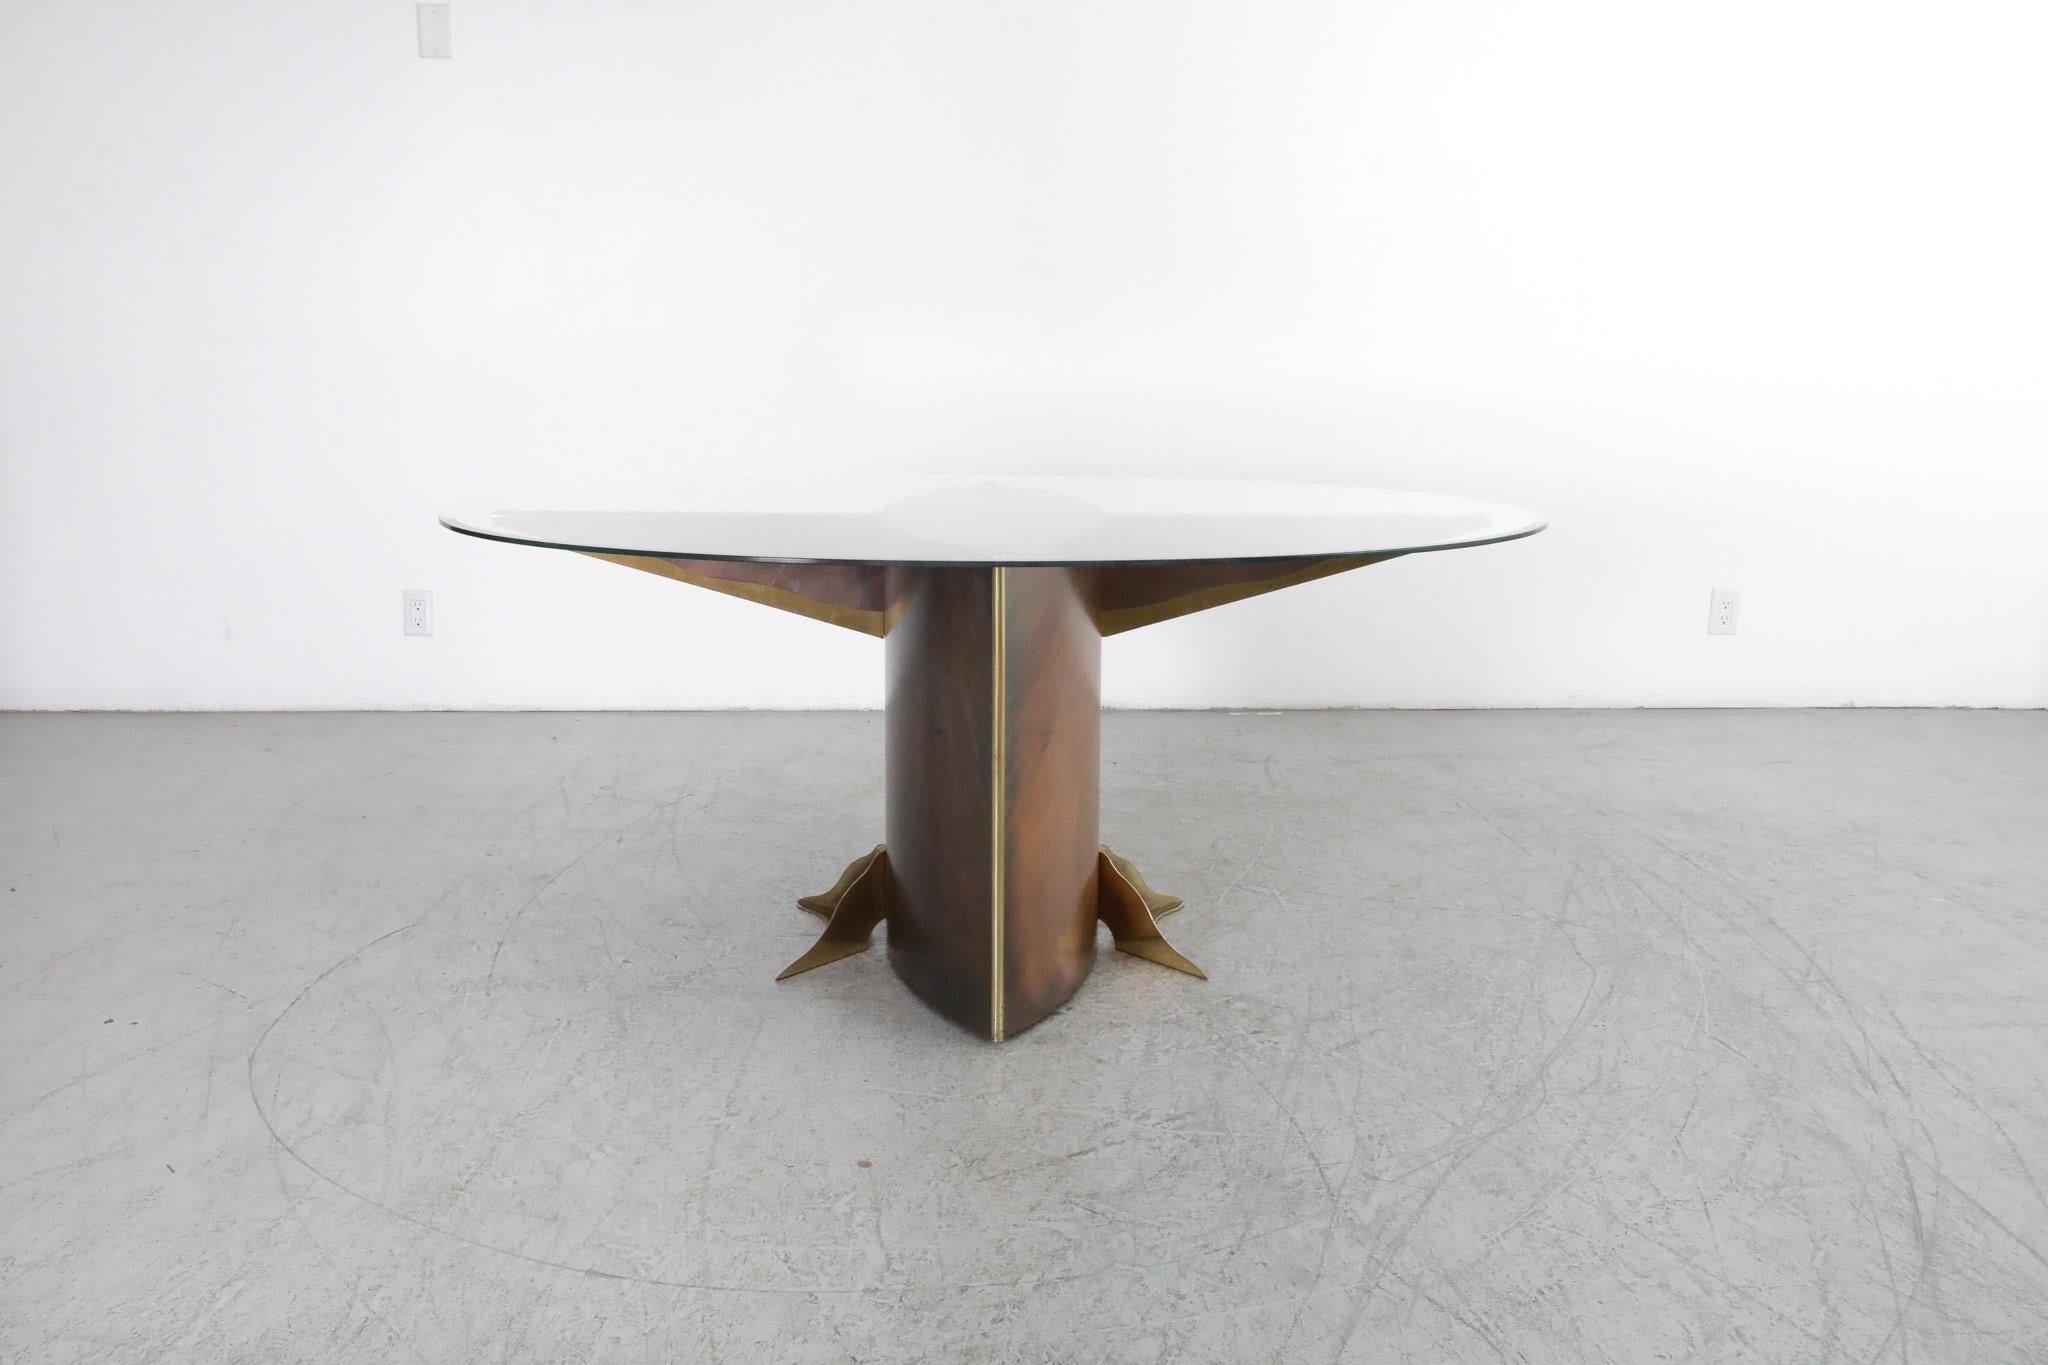 Stunning 1980's, Belgo Chrom made, oval glass dining table with bronzed metal base and gold-plated brass details. The newly fitted glass top has a reverse beveled-edge and comfortable fits up to six. Base is in original condition with age